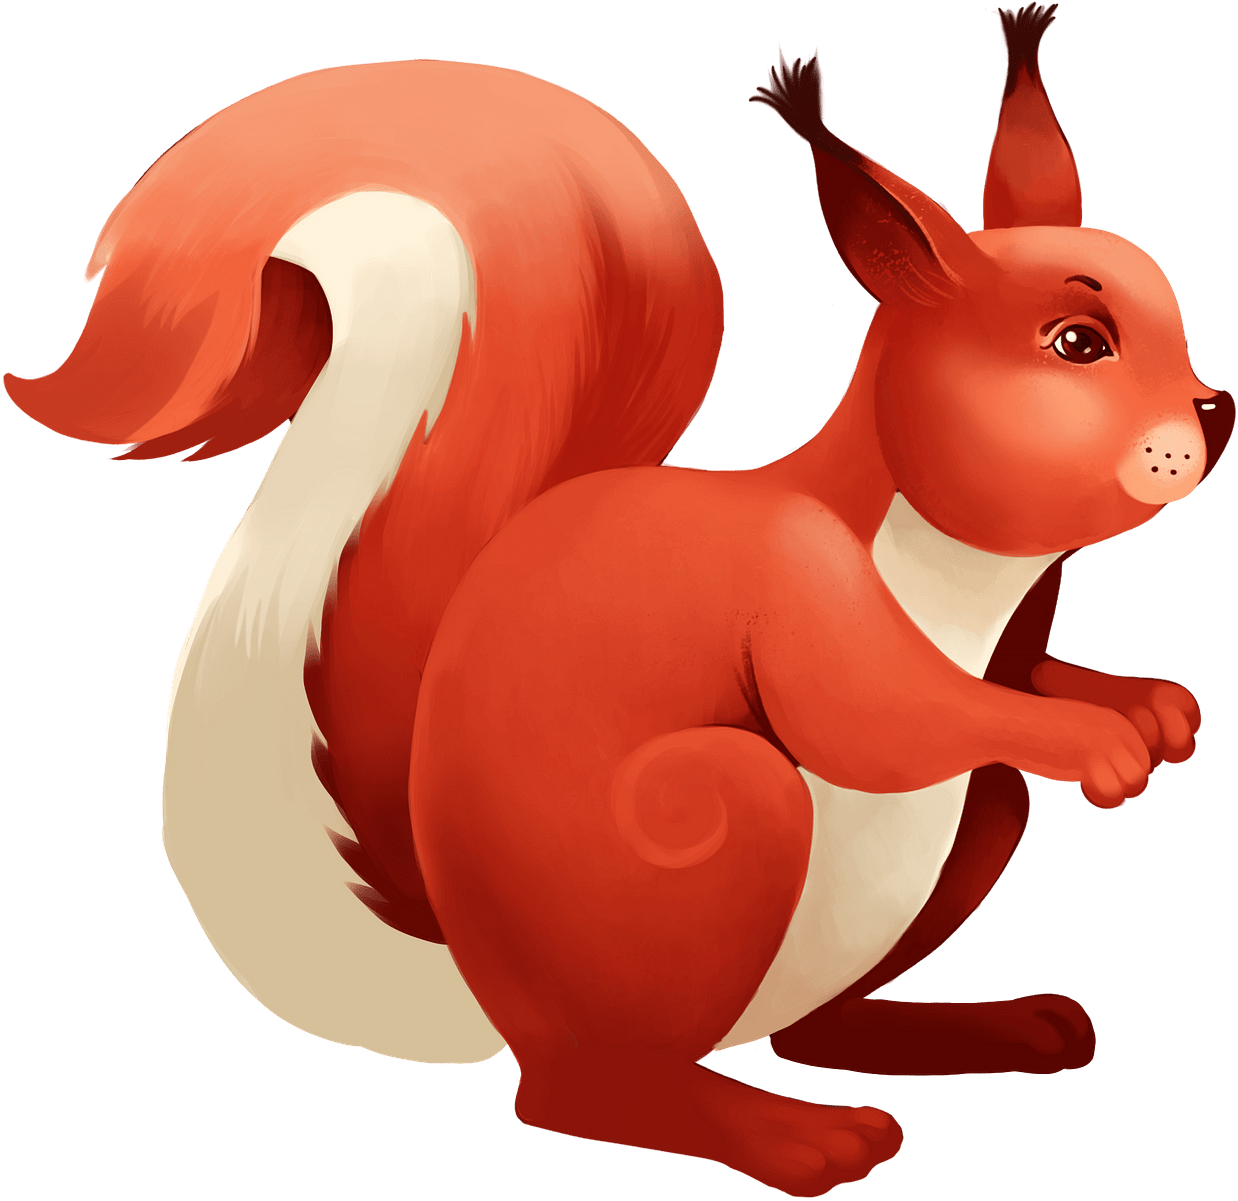 Red Squirrel Illustration PNG